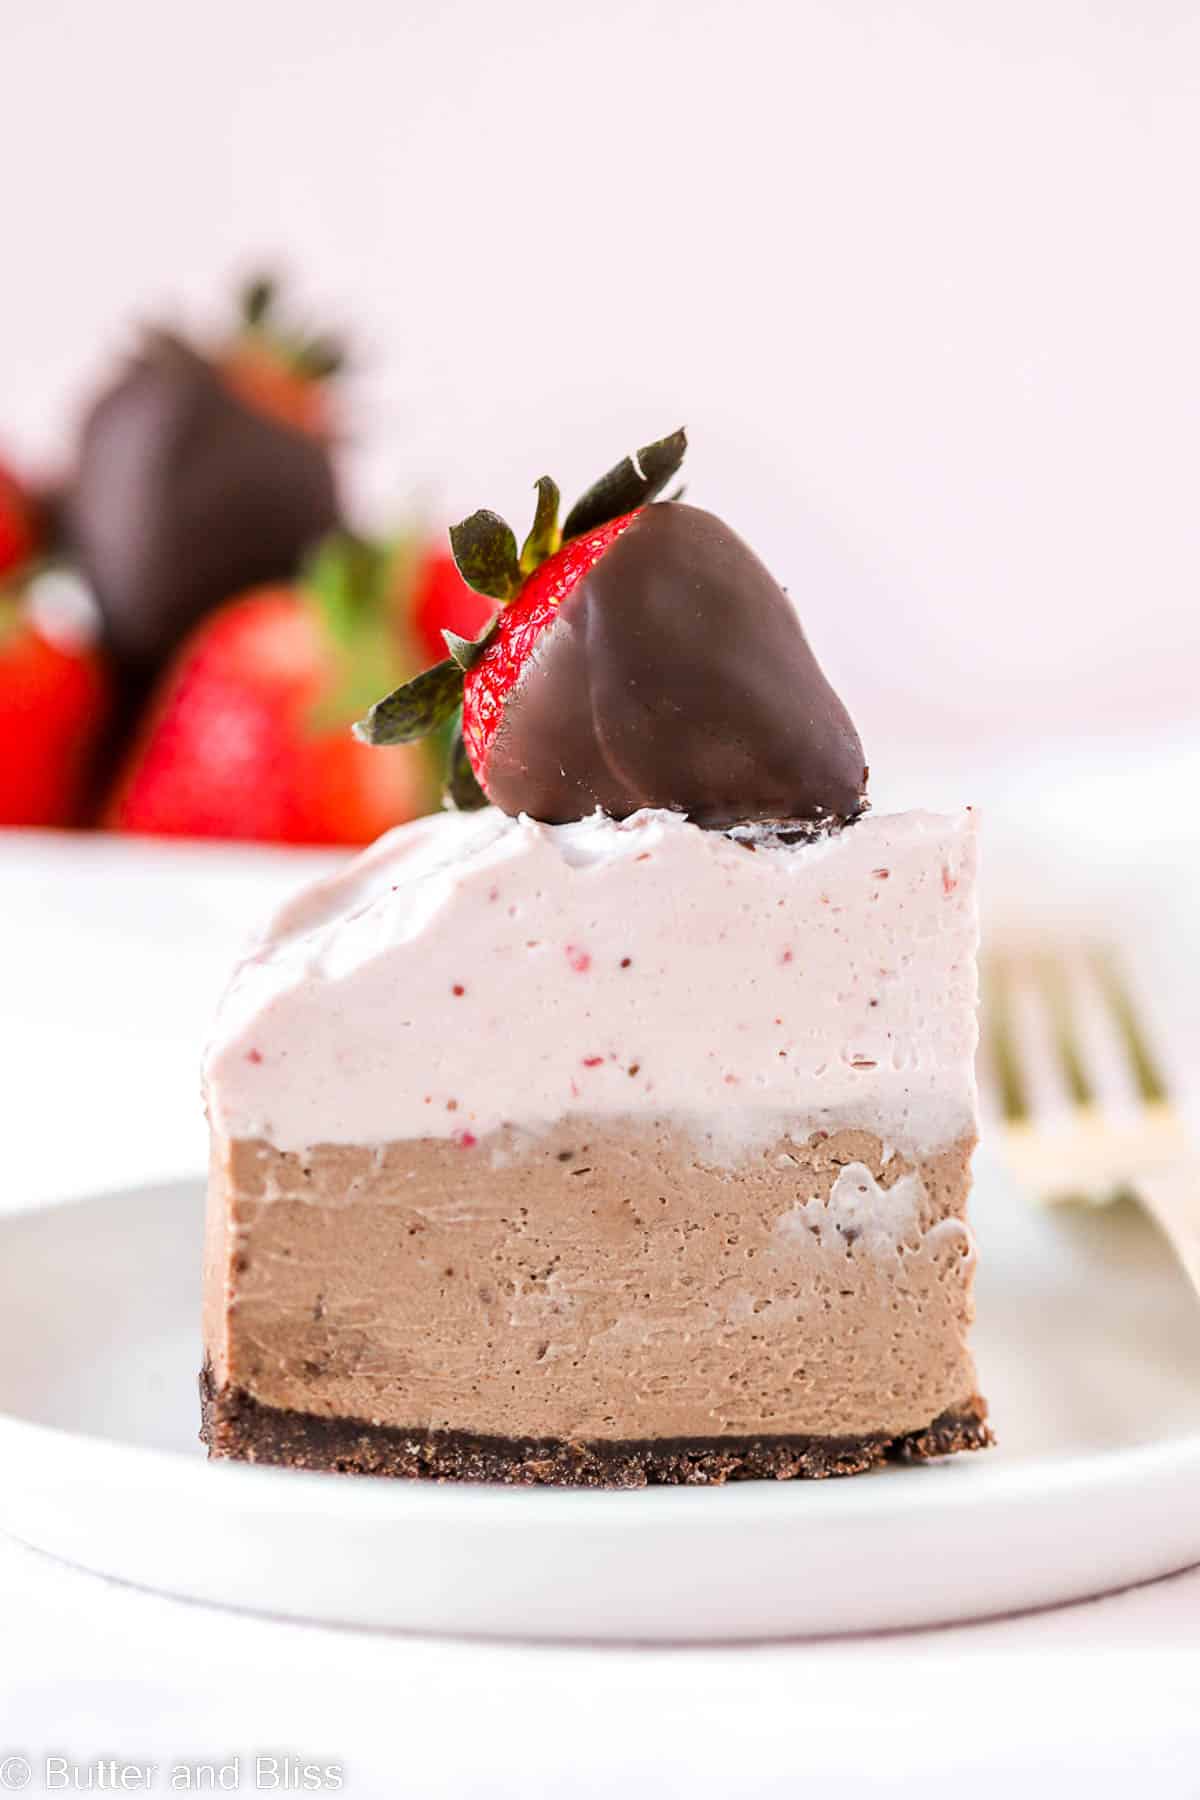 Slice of chocolate strawberry mousse cheesecake on a plate for Valentine's Day.